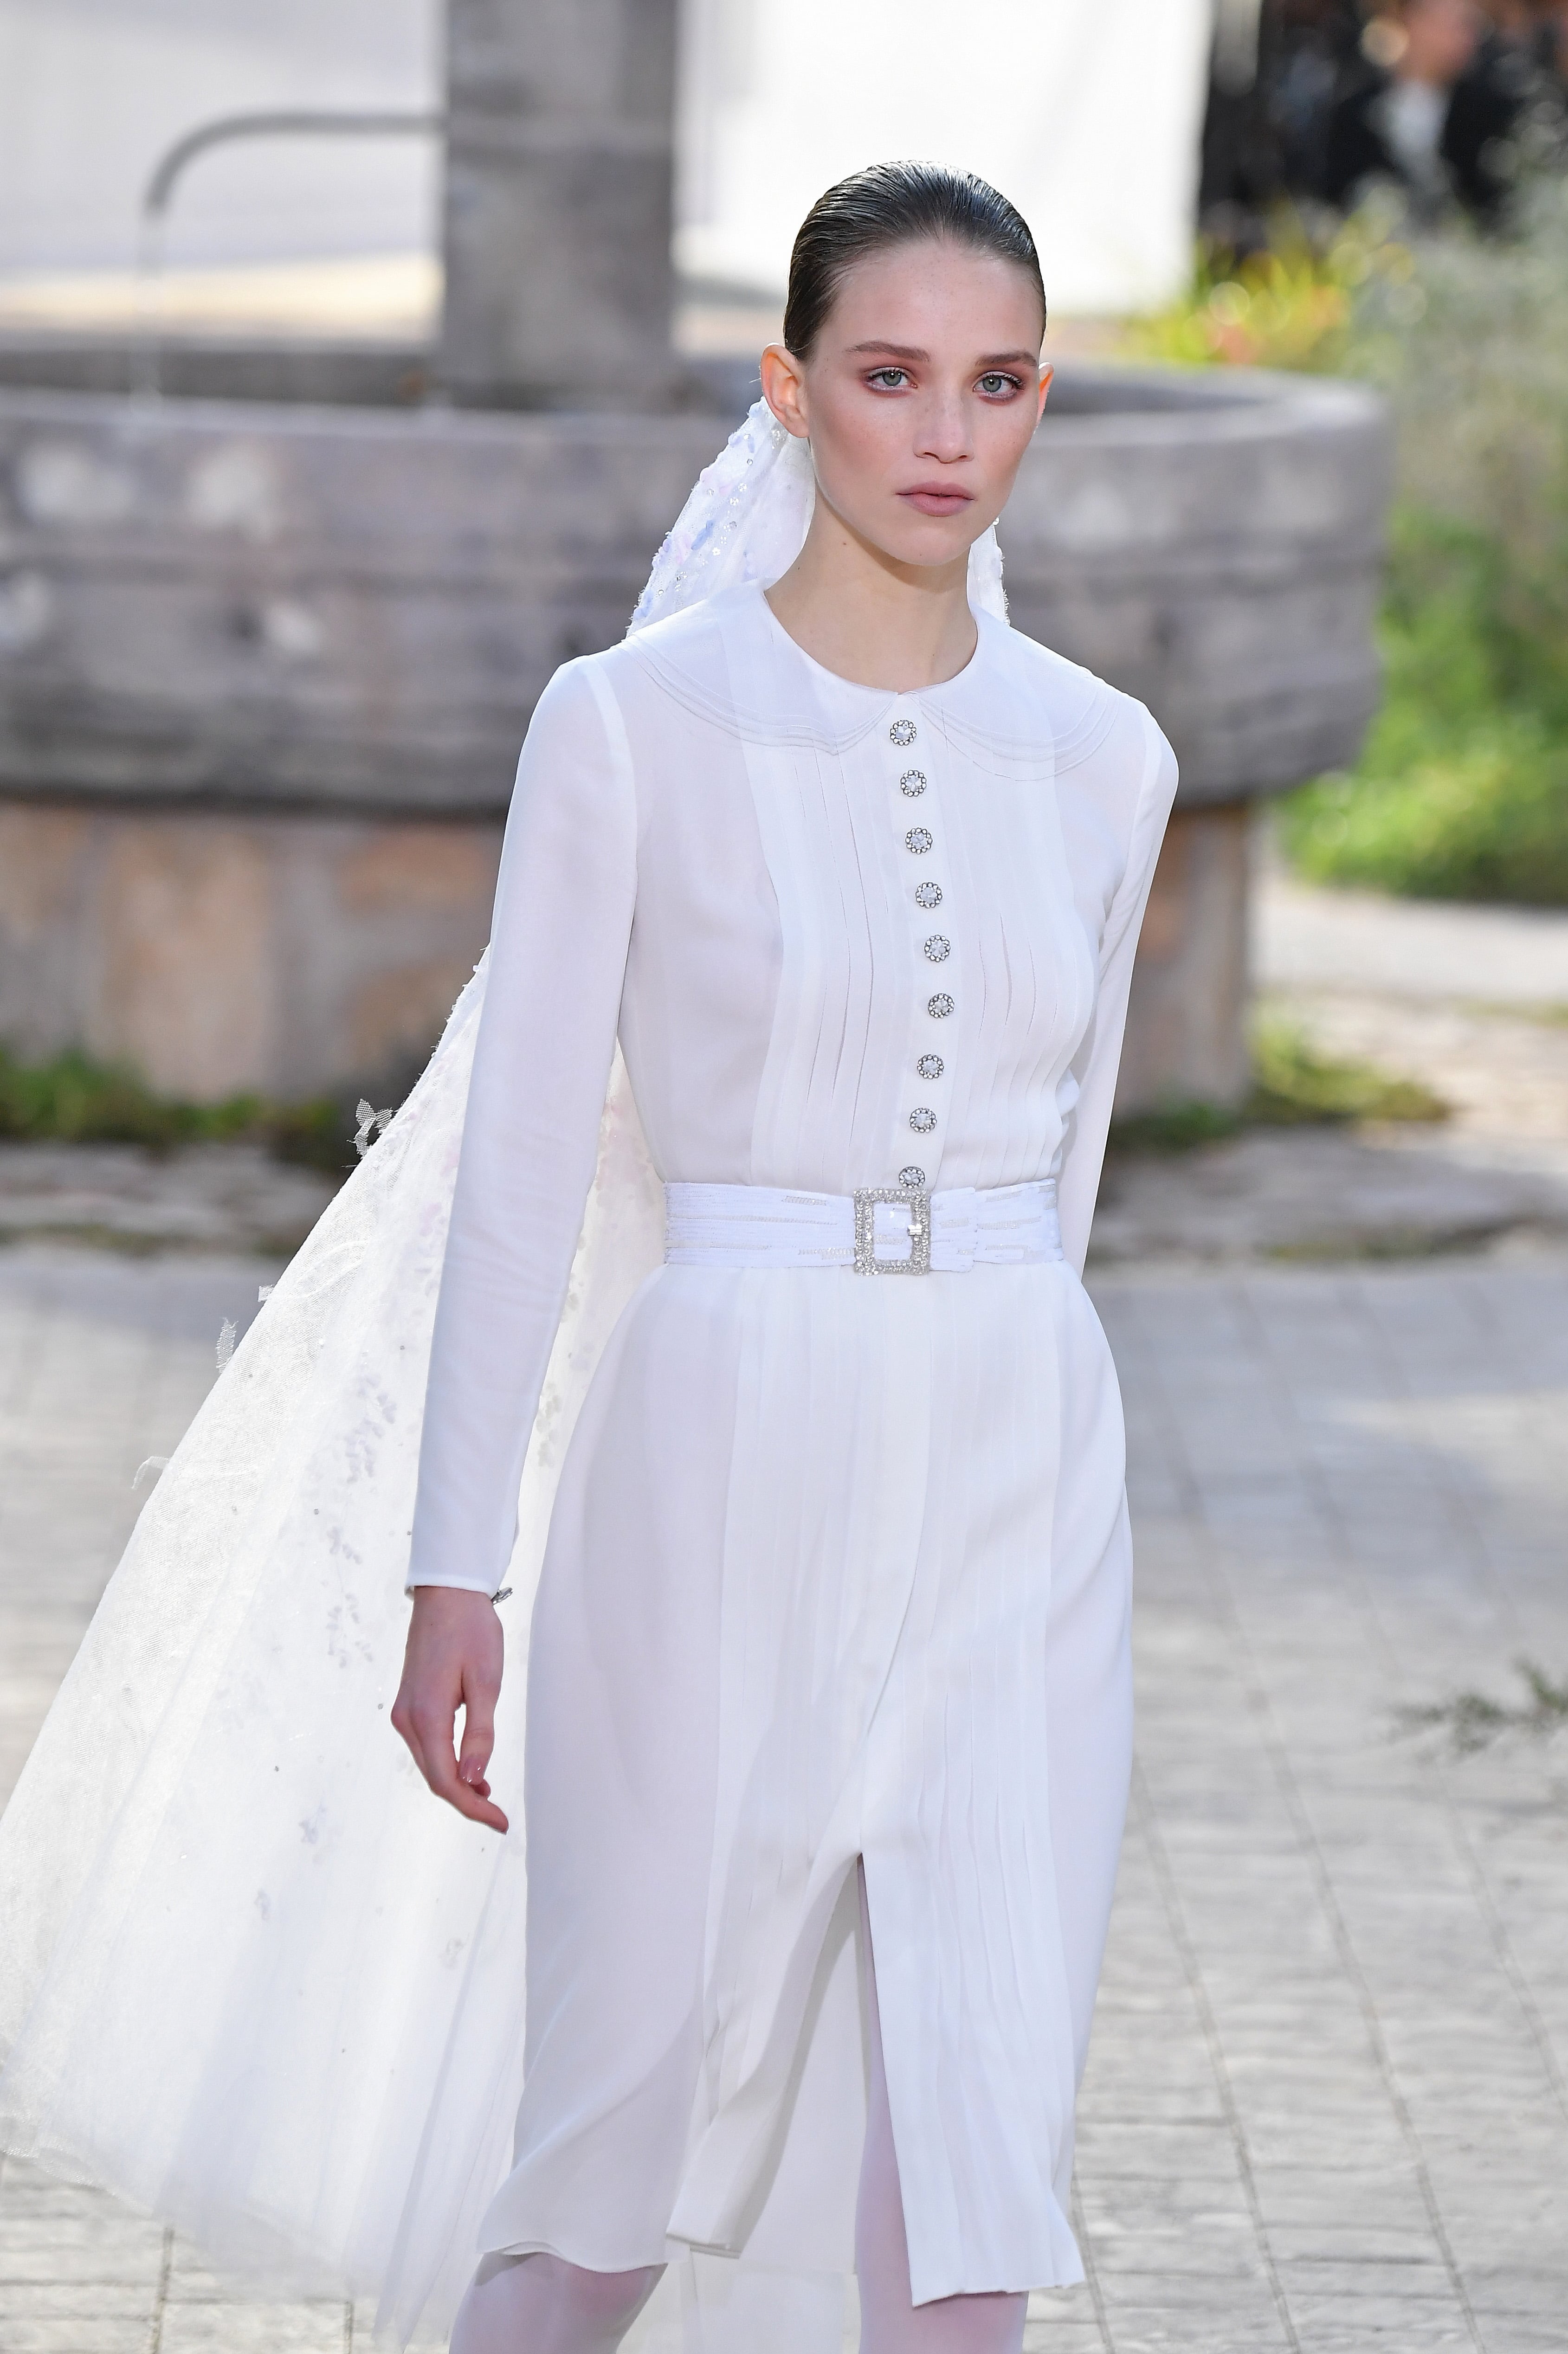 7 best halterneck wedding dresses if you're inspired by Sofia Richie